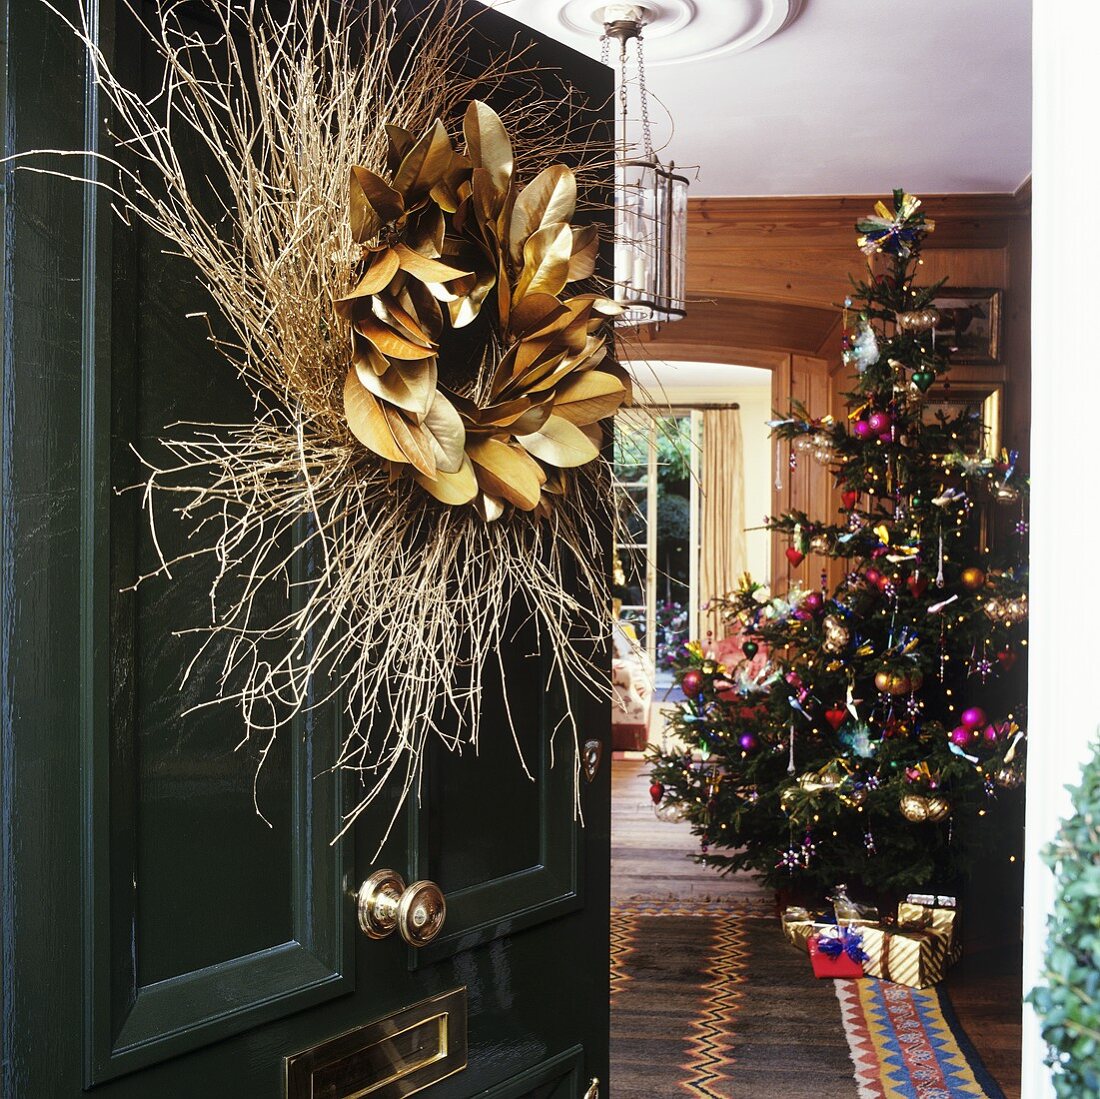 Open front door with wreath and view of a Christmas tree